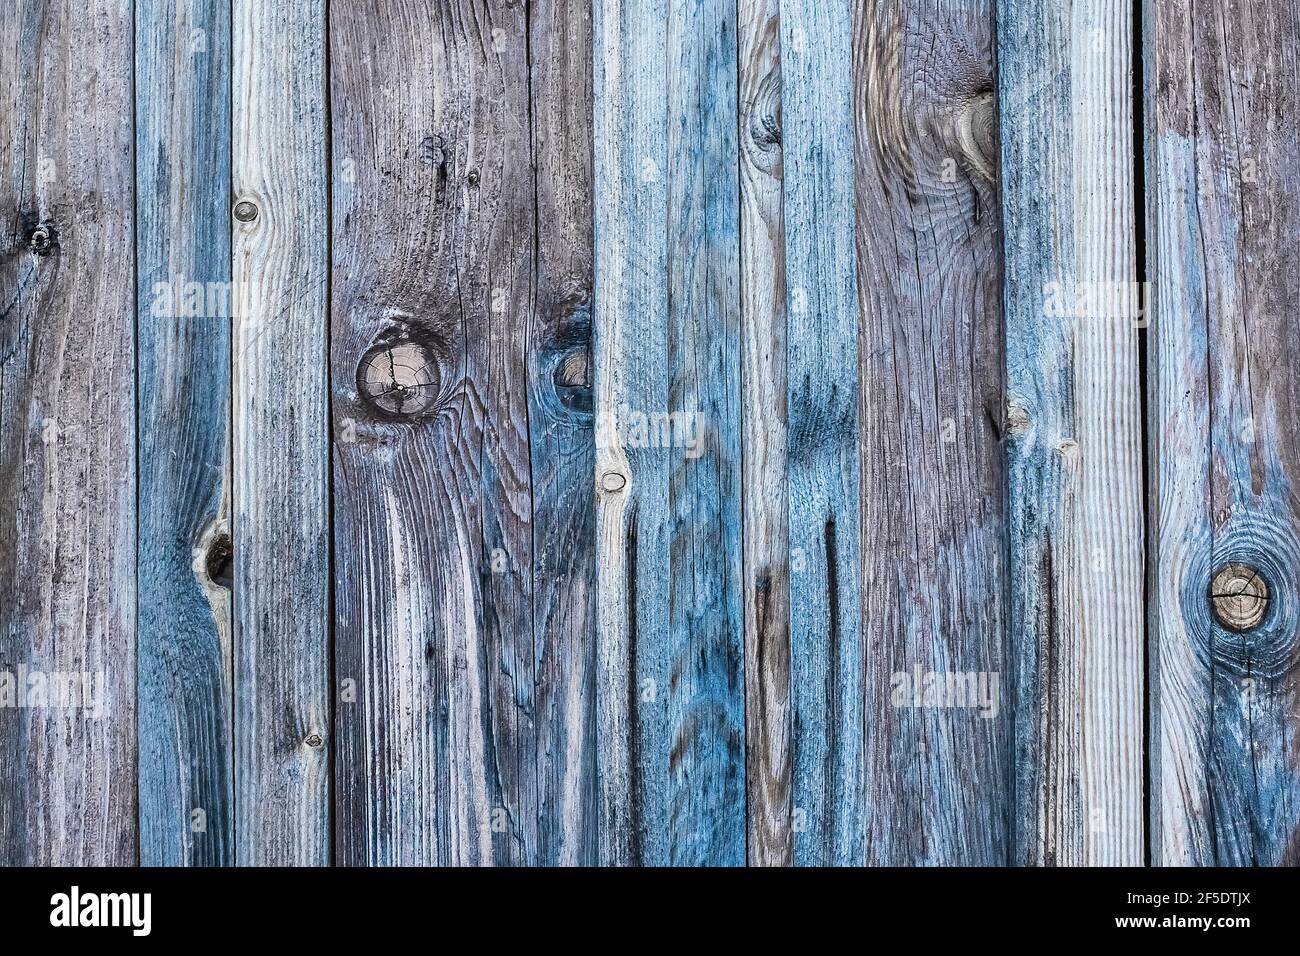 Dark gray seamless texture of an old wooden fence with blue paint, abstract plank background. Stock Photo